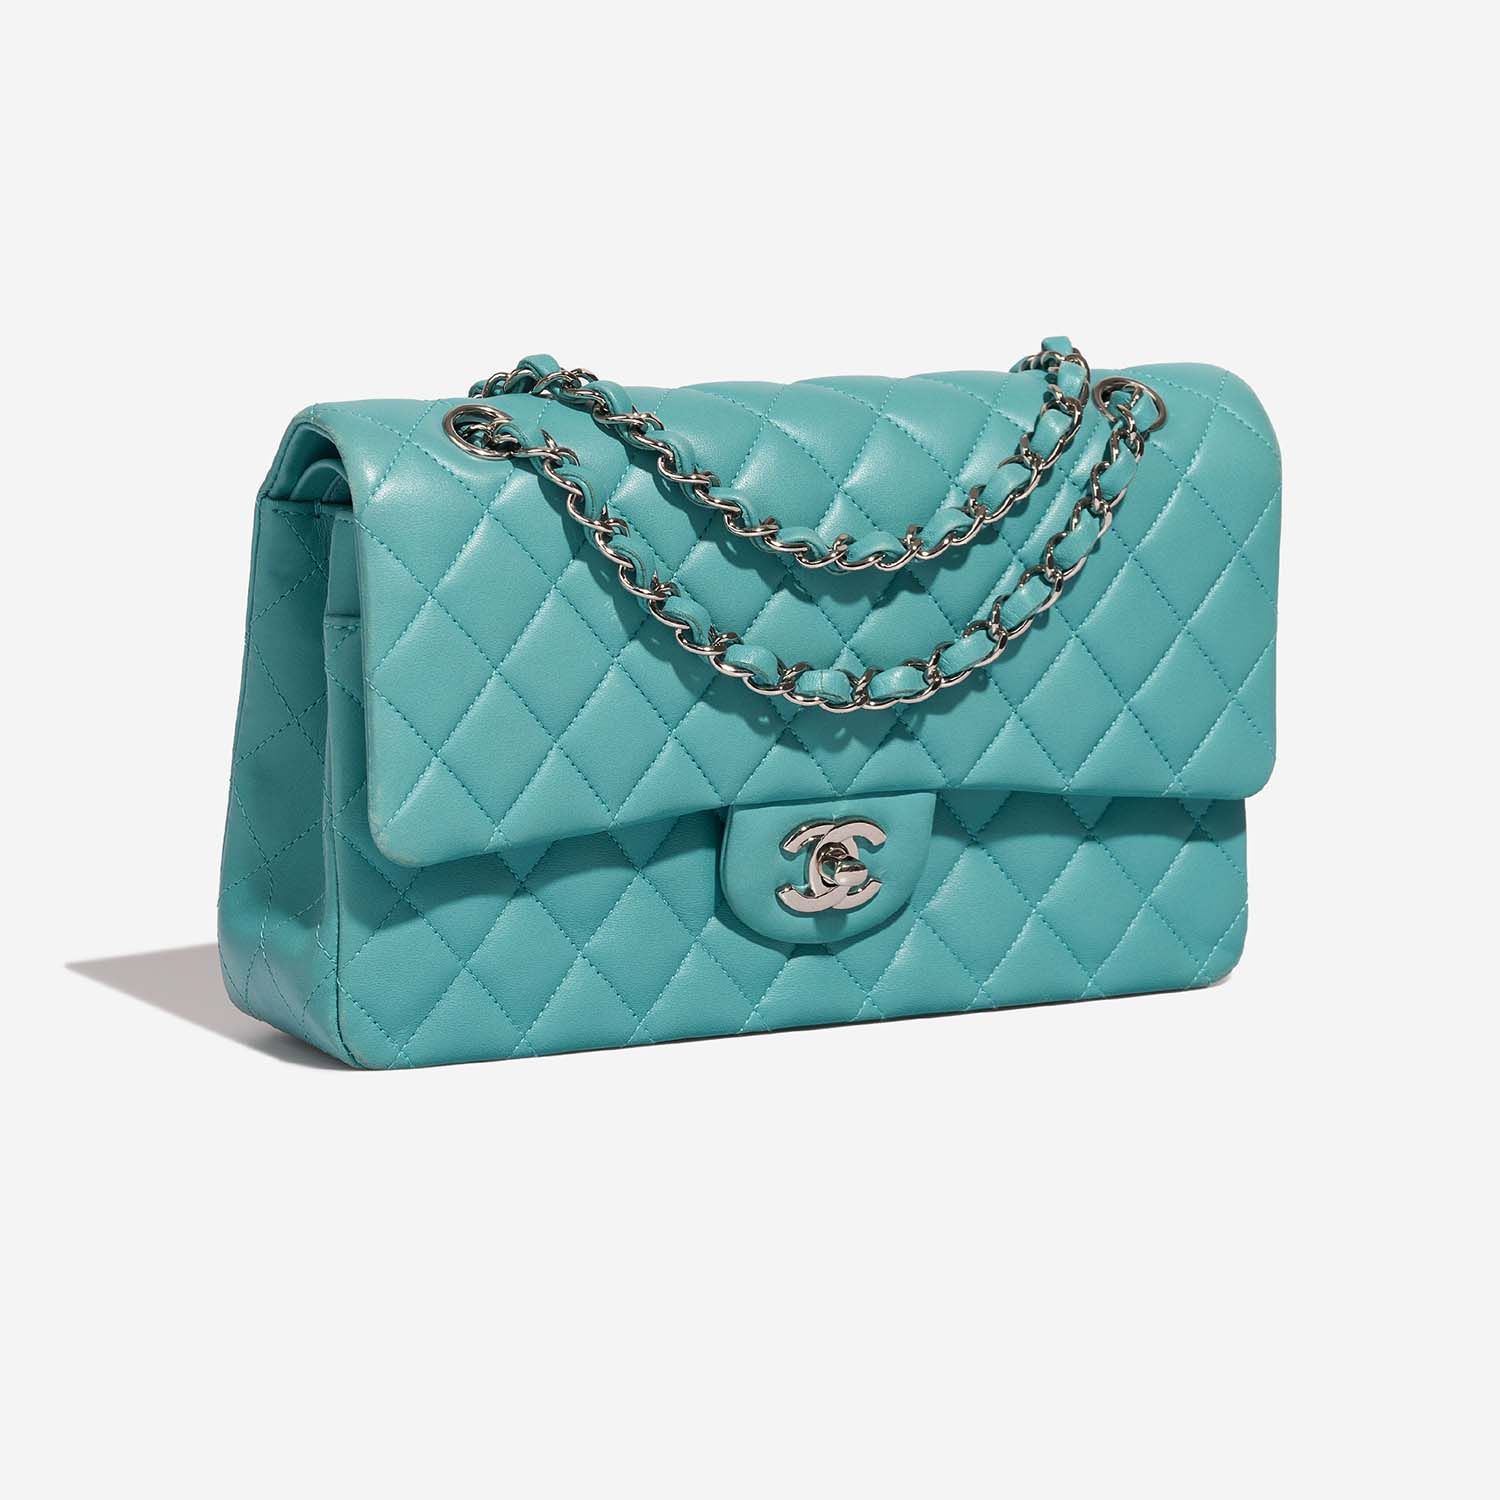 Chanel Timeless Medium Turquoise Side Front  | Sell your designer bag on Saclab.com